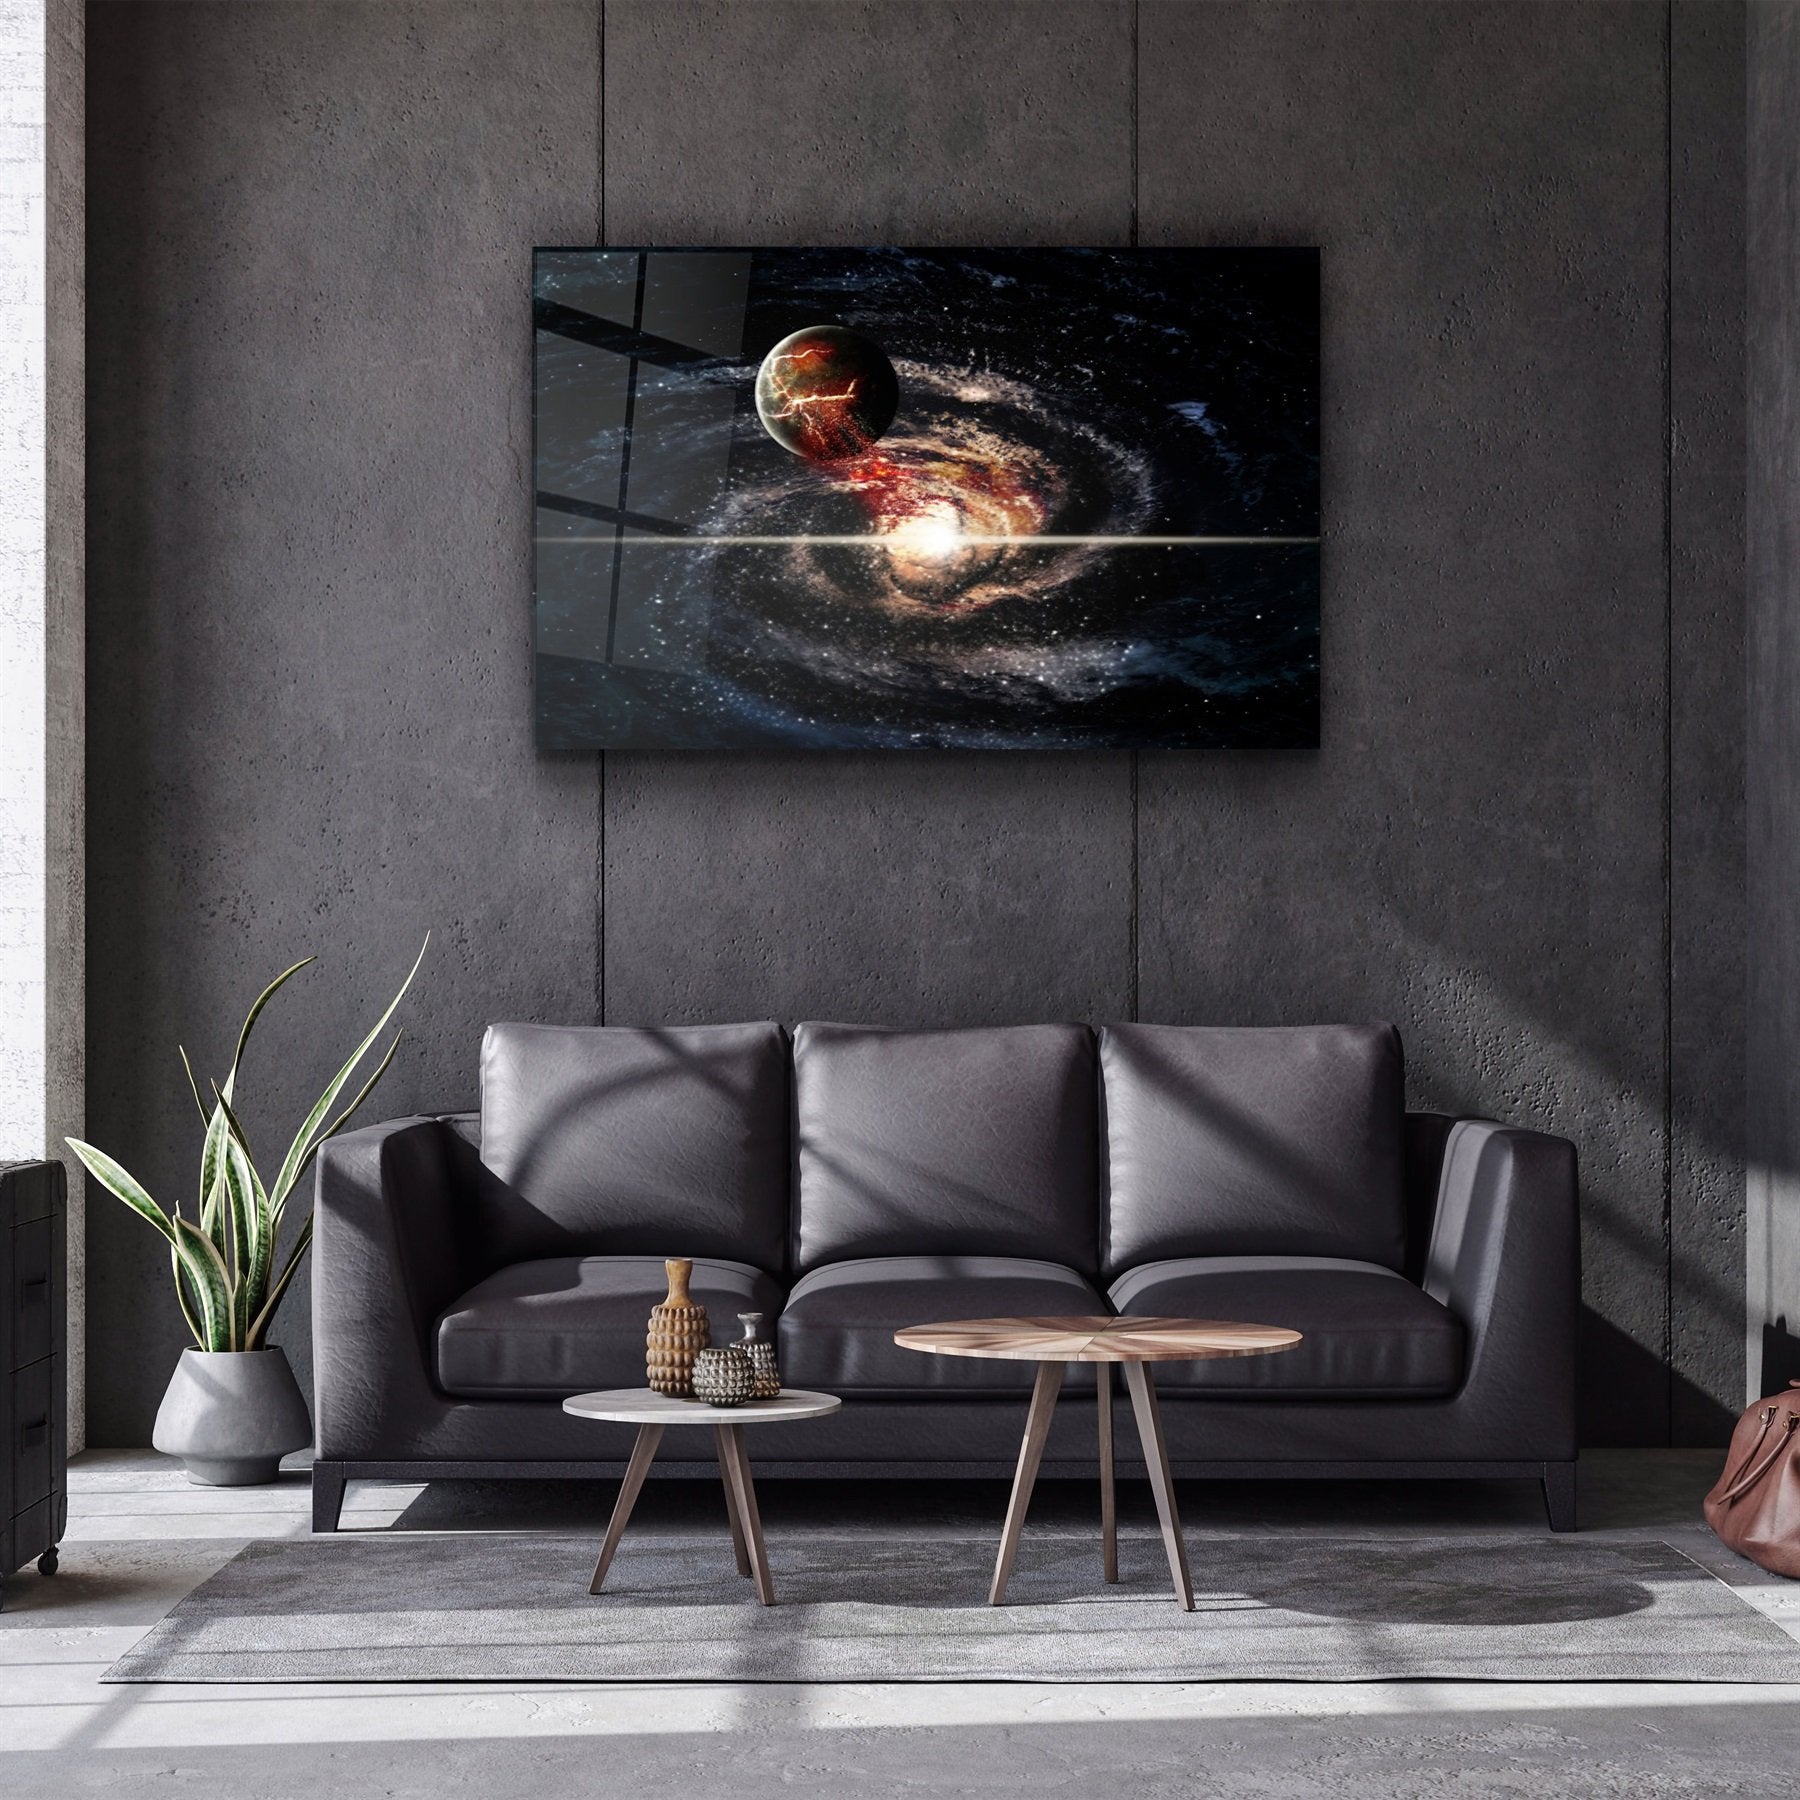 ・"Lost in Space"・Glass Wall Art